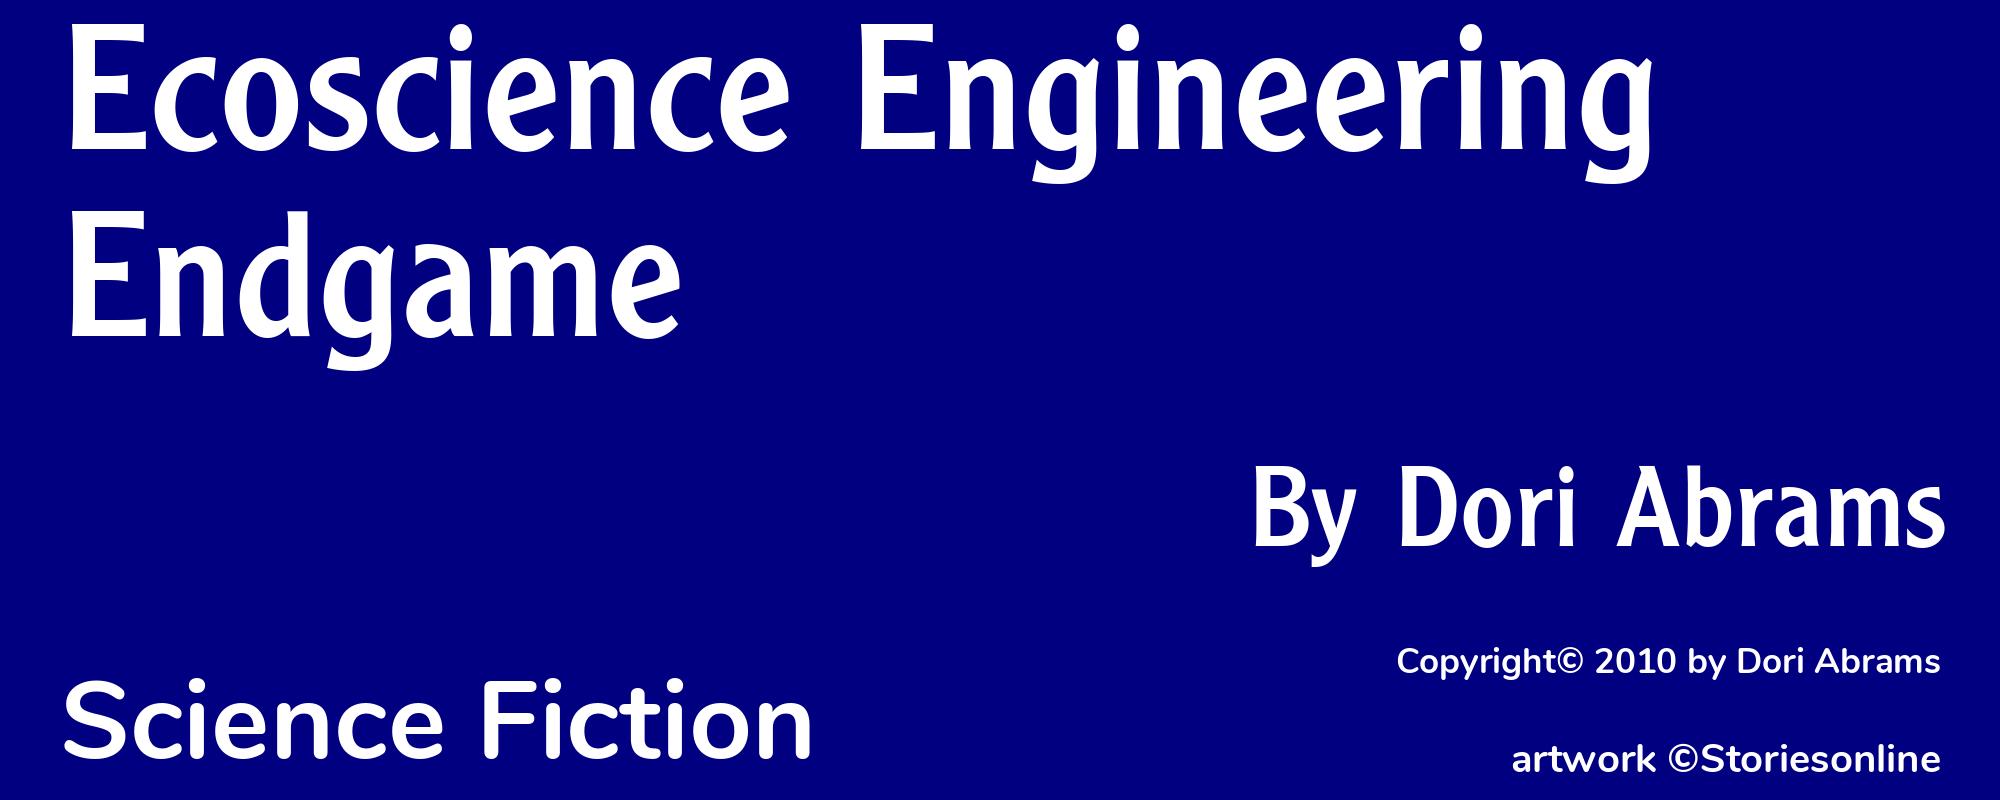 Ecoscience Engineering Endgame - Cover